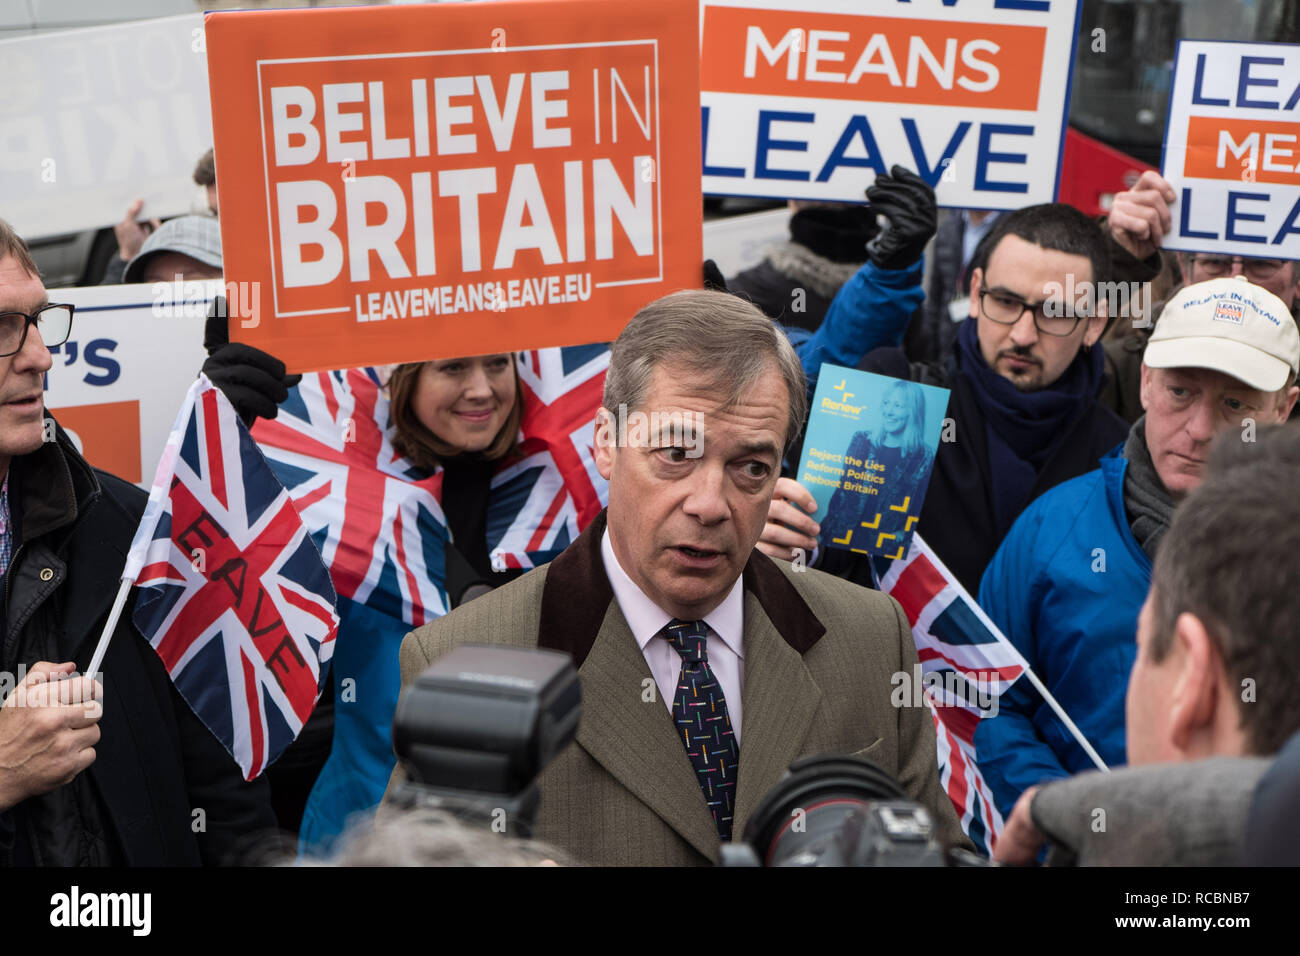 London, UK. 15th January 2019. Nigel Farage with brexit protesters outside Parliament in London, UK. Credit: Jason Wood/Alamy Live News. Stock Photo